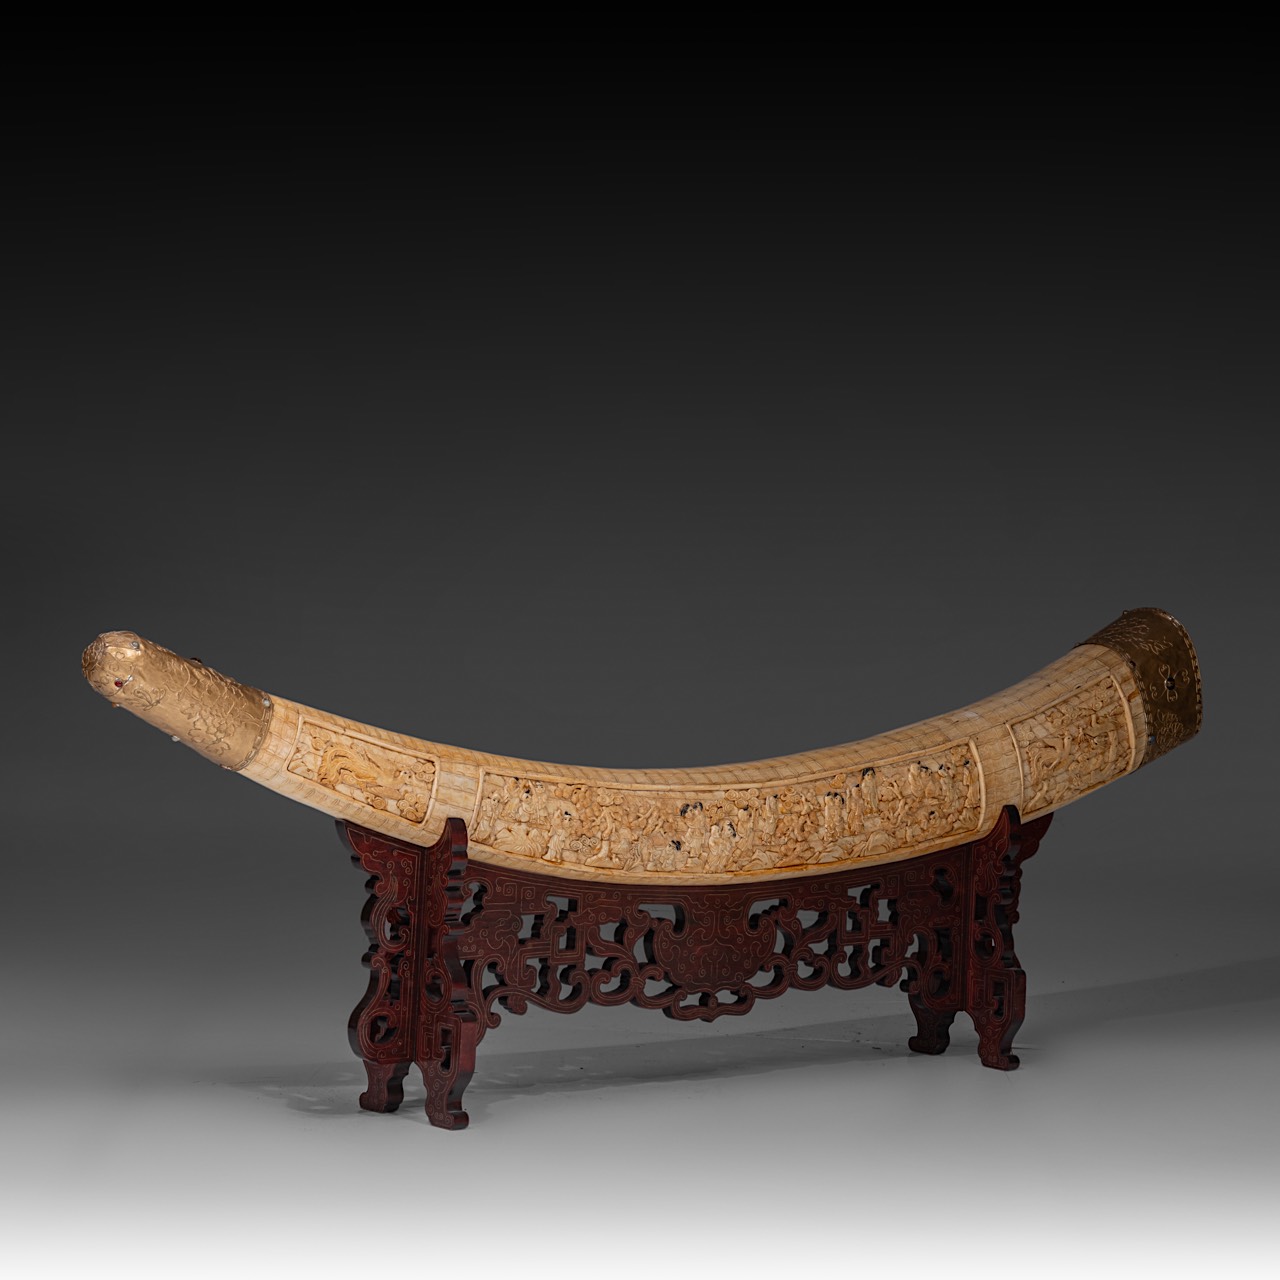 Tusk made from sculpted bone slats, Qing/Republic period, inner arch 165 cm - outer arch 175 cm - Image 2 of 13